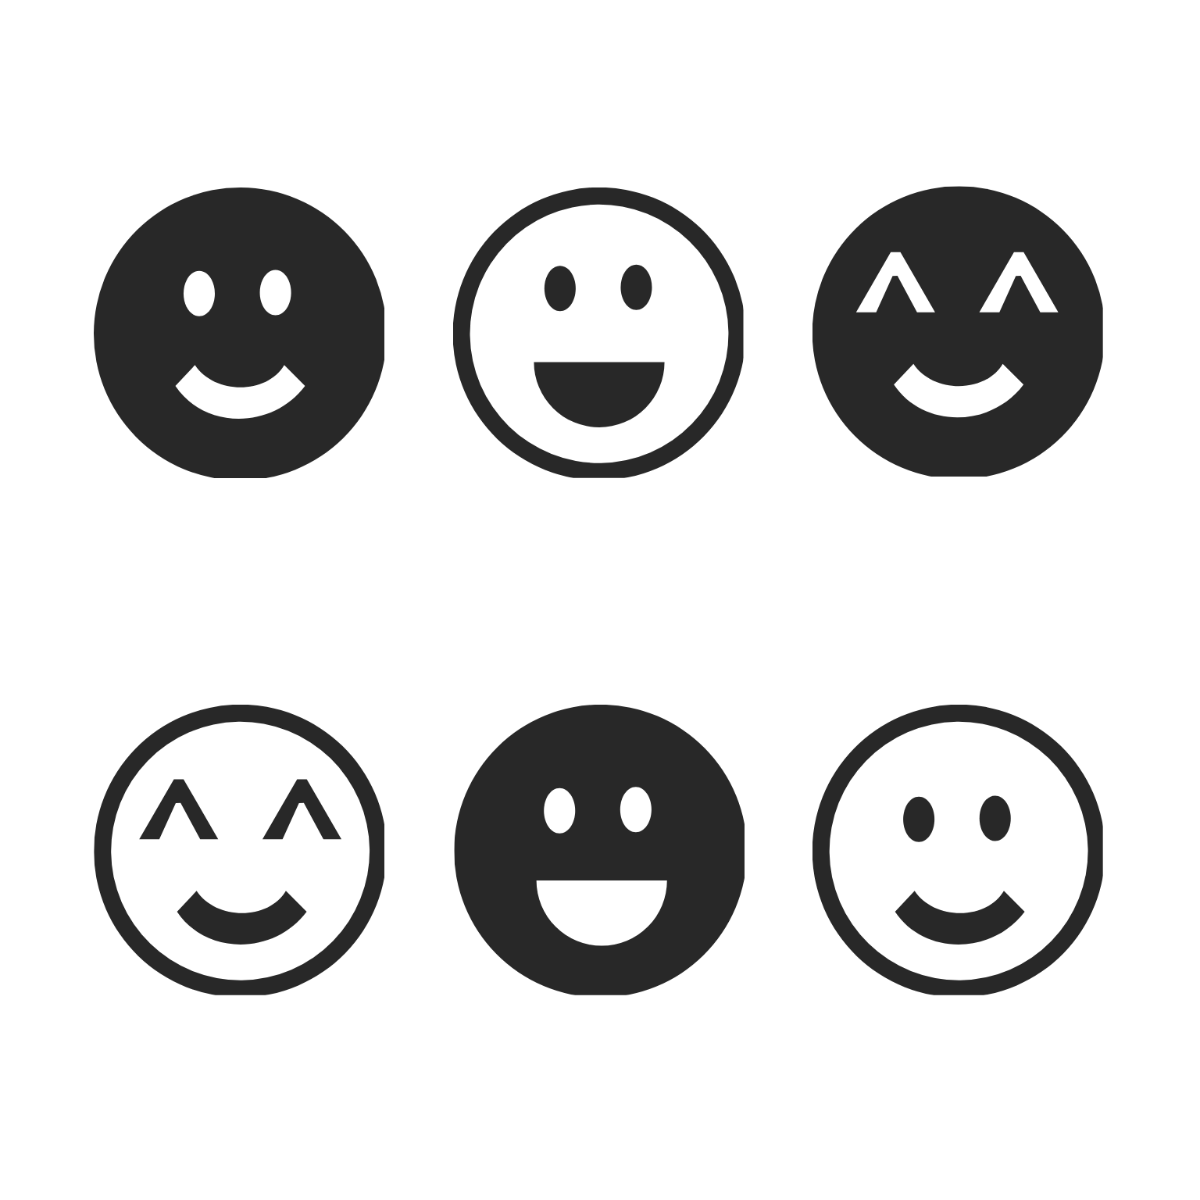 Black and White Smiley Face Vector